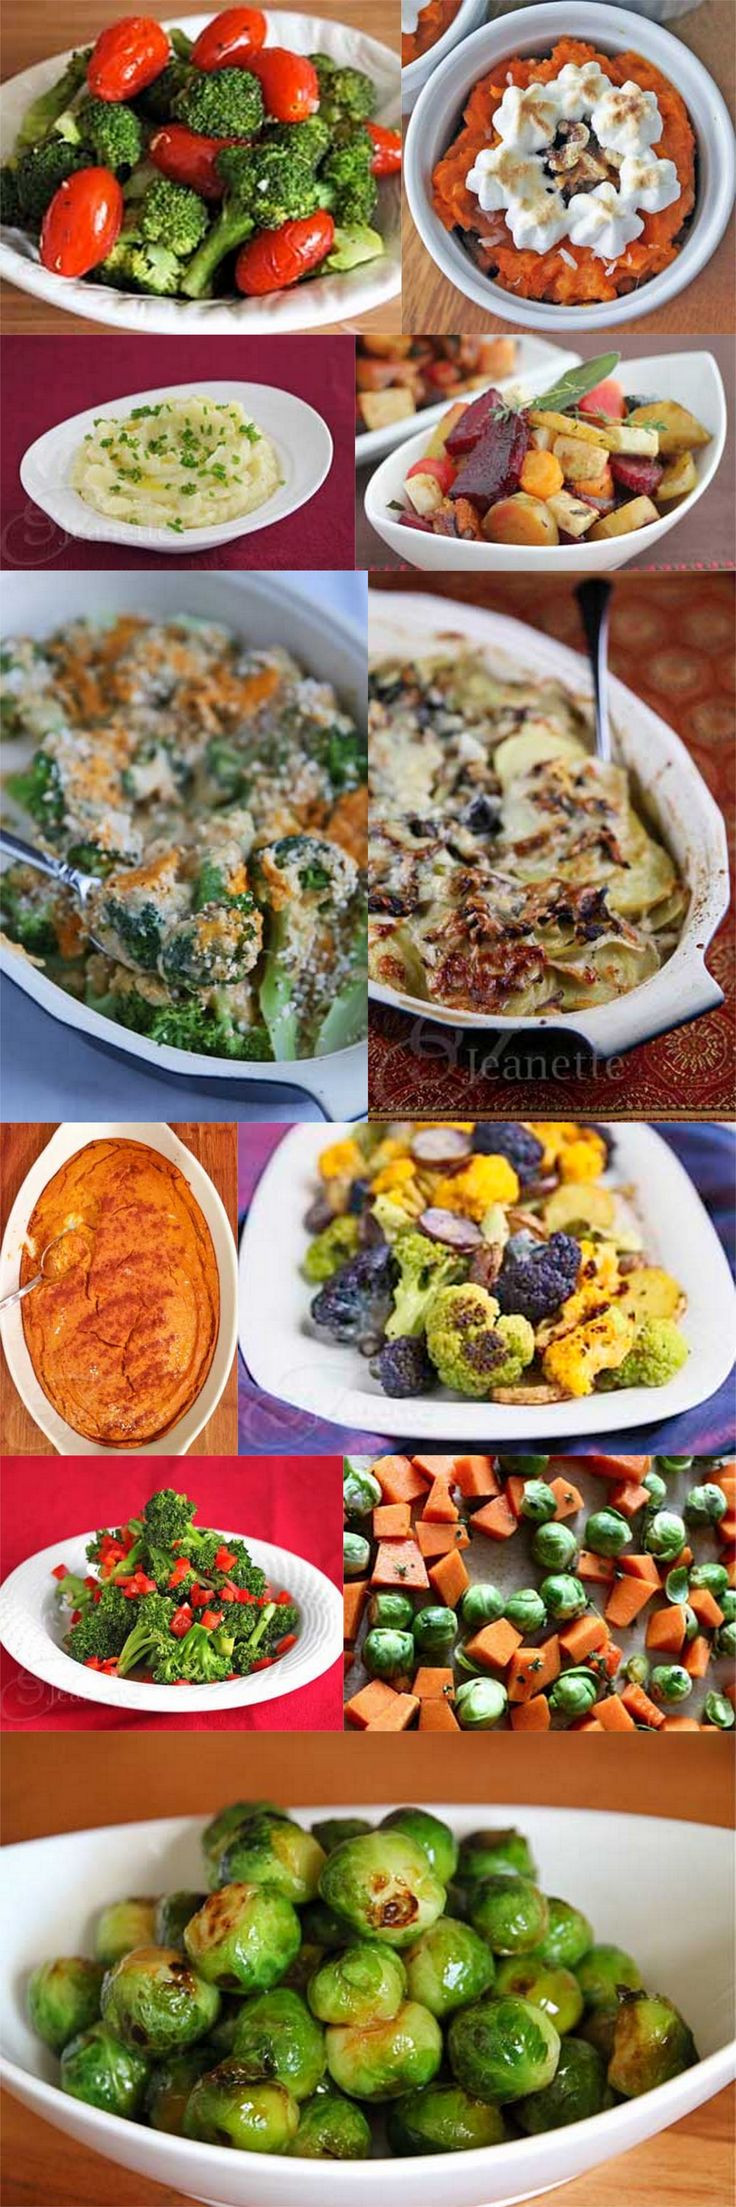 Good Christmas Side Dishes
 40 best images about Great Sides and Ac paniments on